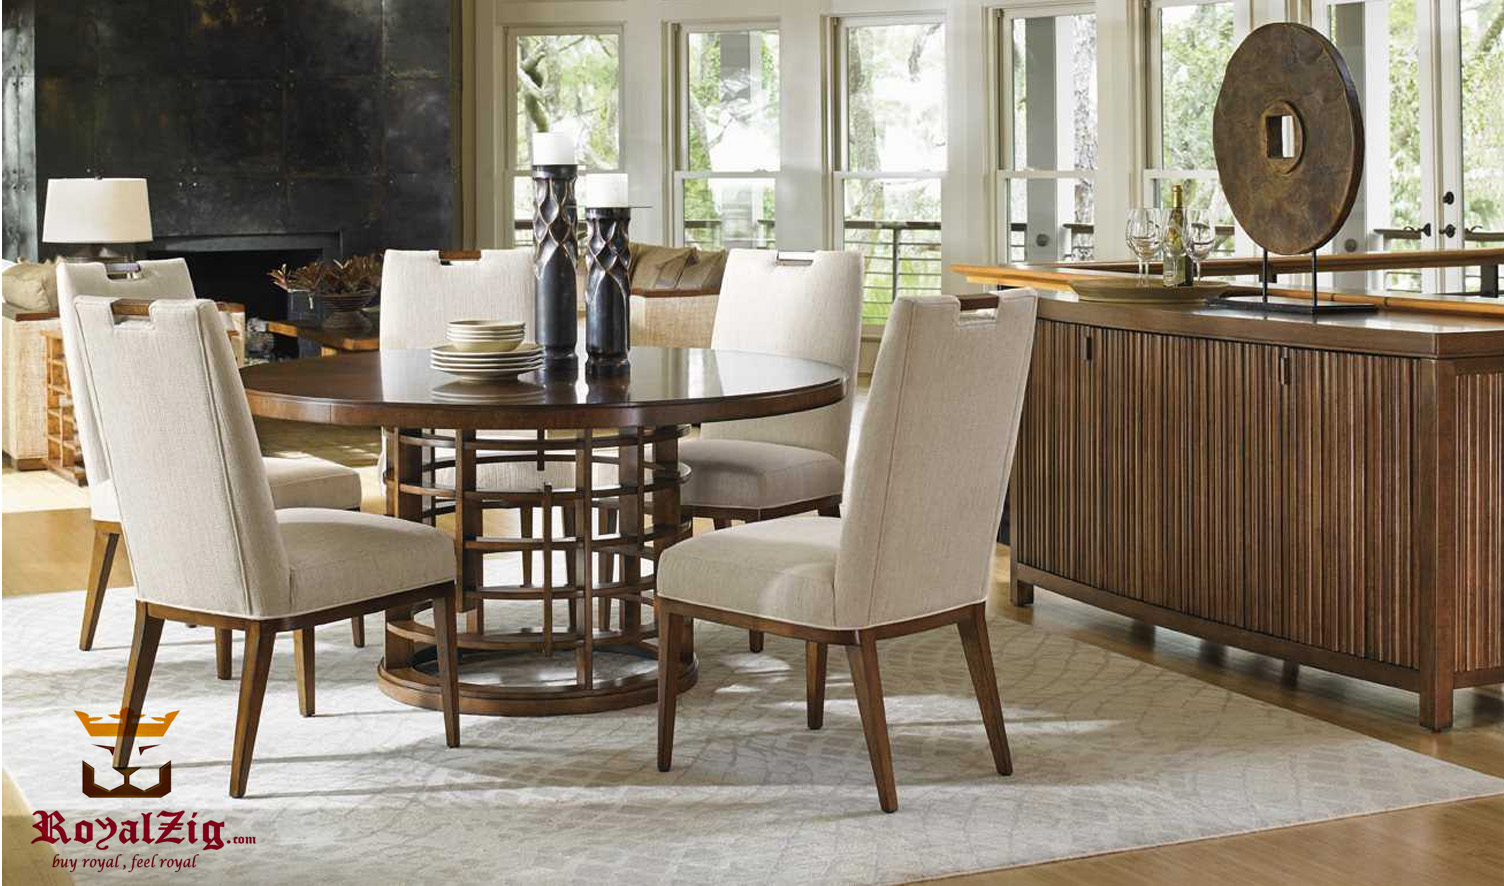 Cobham Modern Luxury Dining Table With Uplholstered Chairs